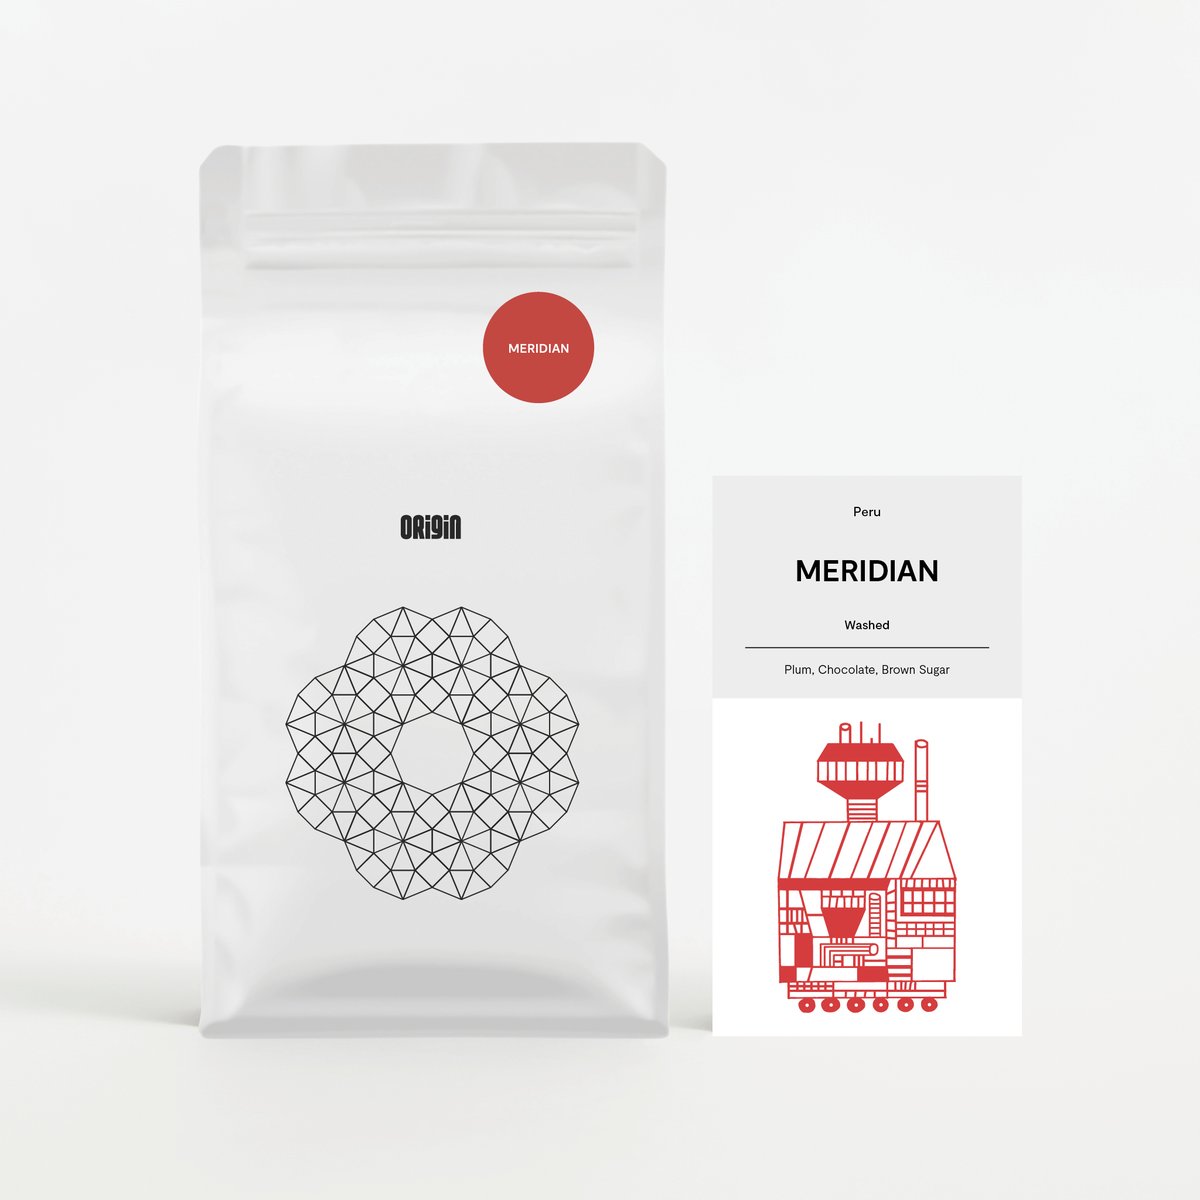 Meet Meridian--the latest edition to our ever-growing coffee collection, a washed process coffee from Peru, loaded with notes of chocolate, brown sugar, and plum. Shop Meridian > bit.ly/3GjIEJg